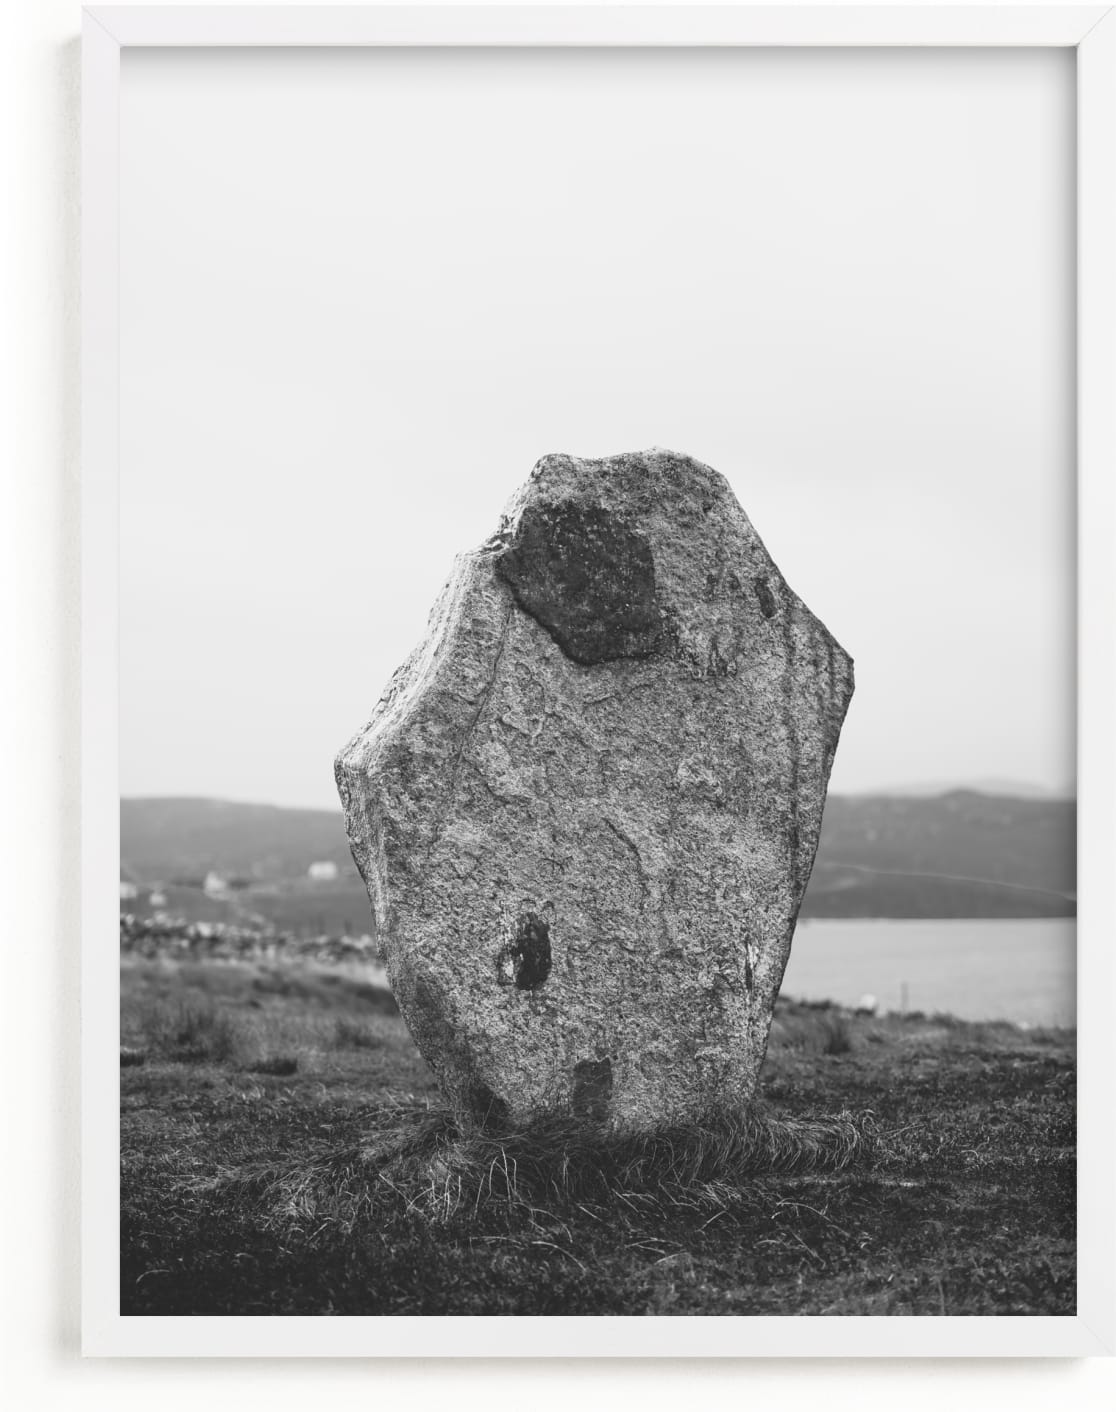 This is a black and white art by Kamala Nahas called Standing Stones I.